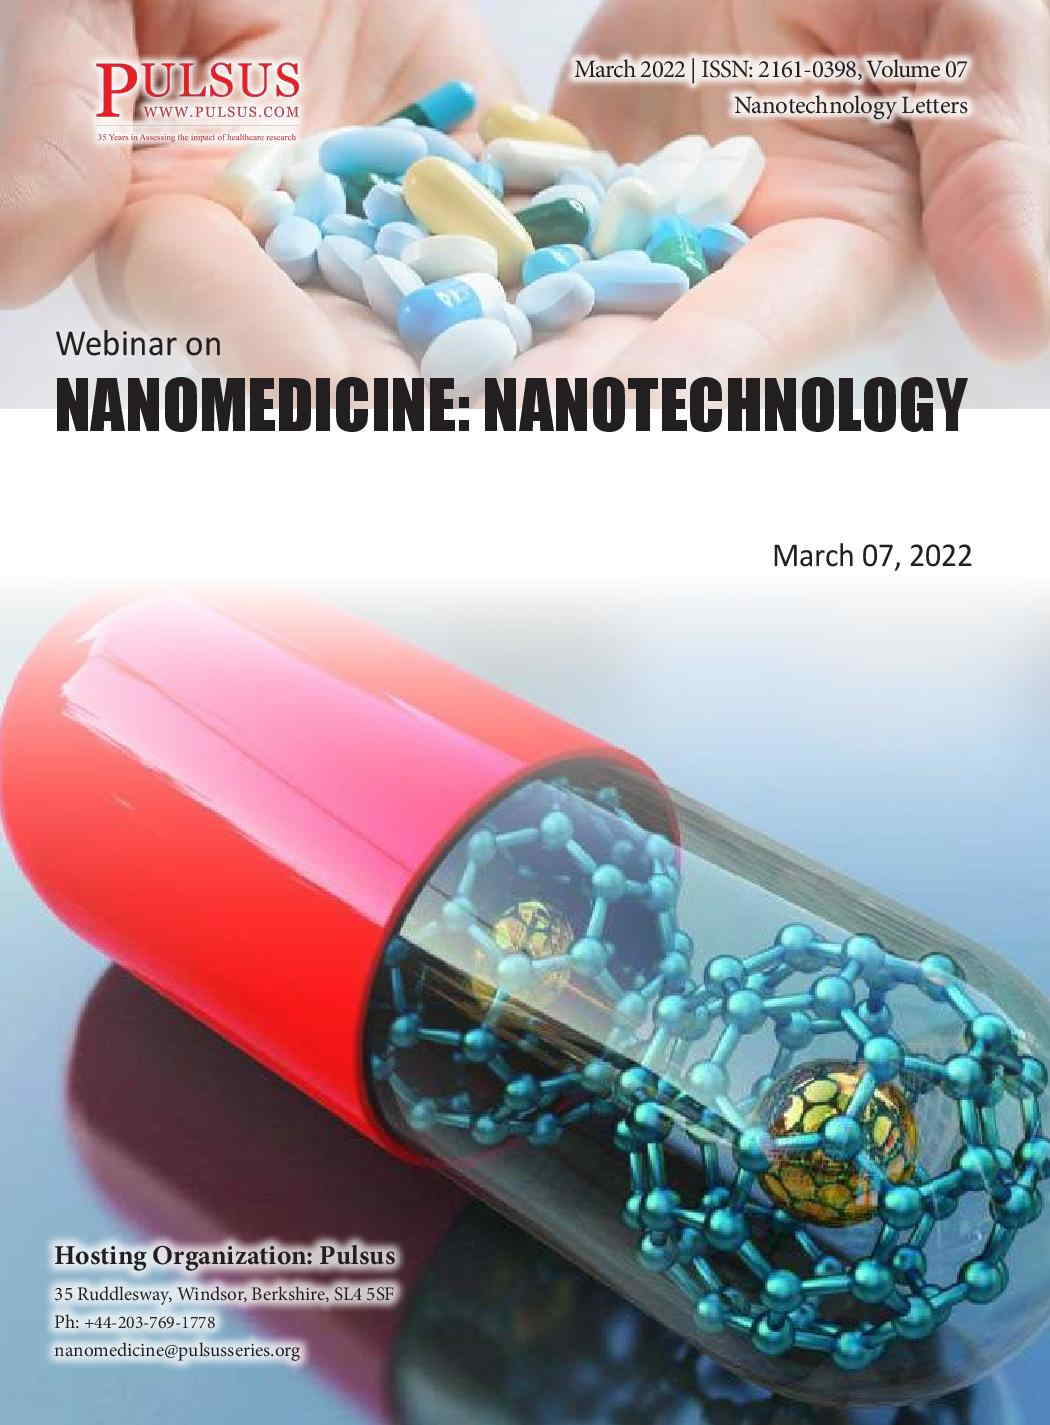 https://www.pulsus.com/conference-abstracts/nanomedicine-2022-proceedings.html